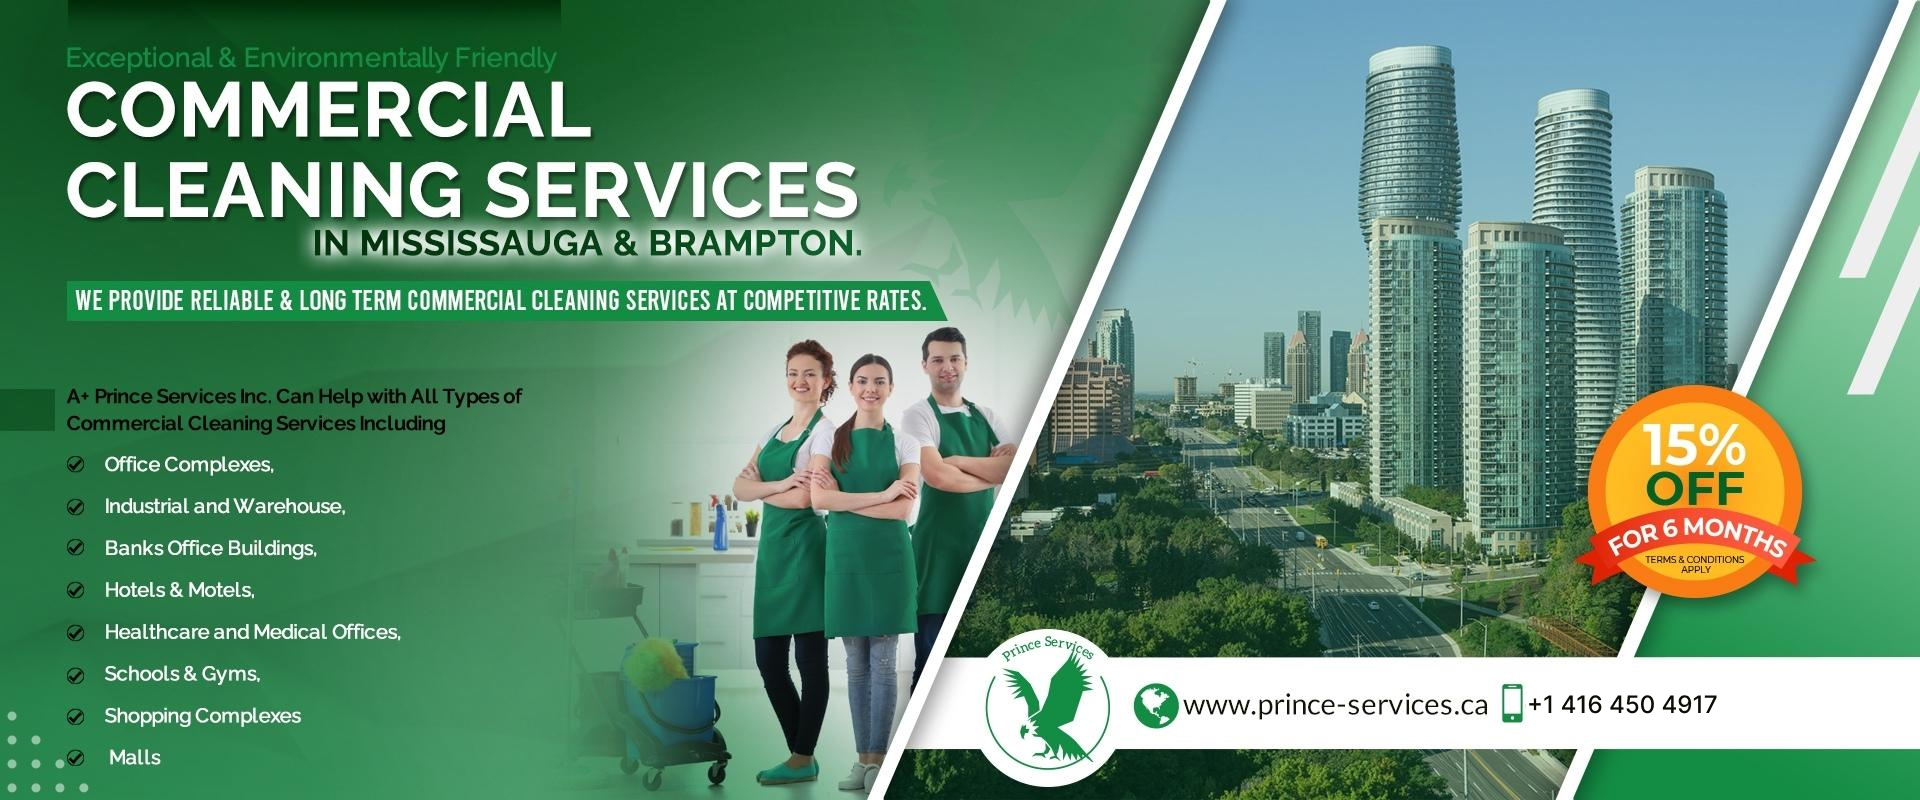 A+ prince-services-banner